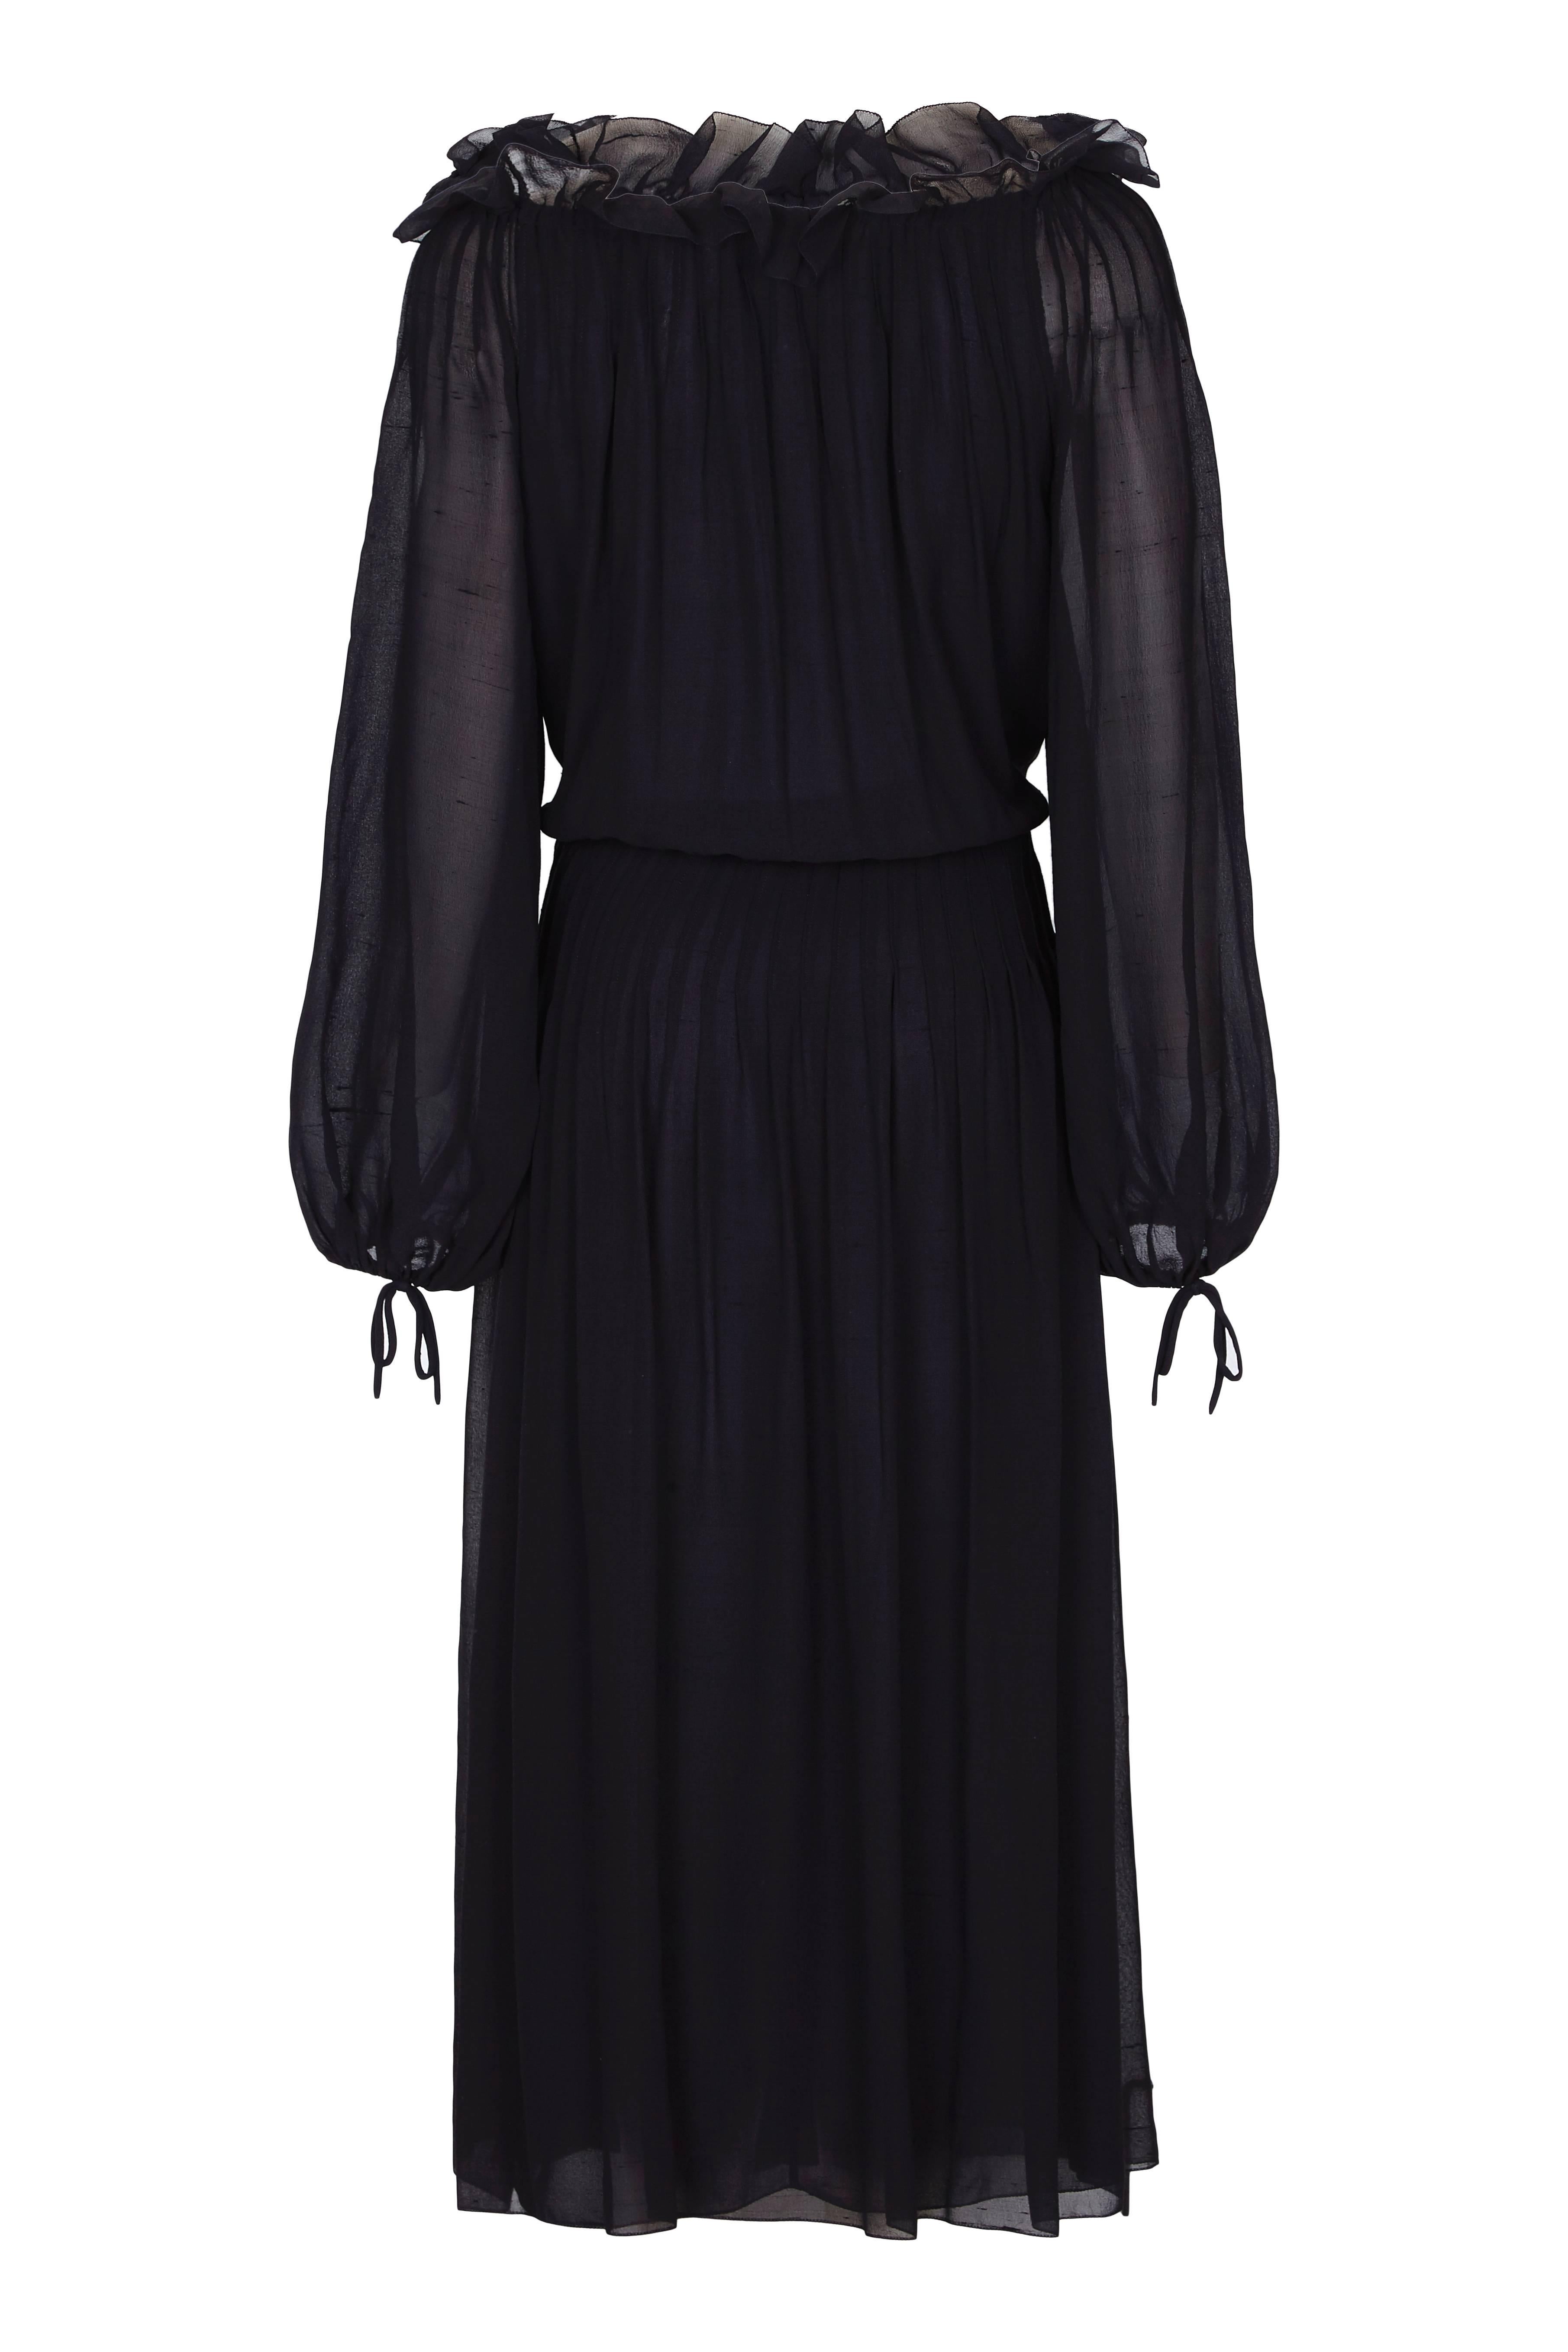 Vintage 1970s Christian Dior black silk chiffon dress with balloon sleeves and ruffled neckline.  The skirt and bodice of the dress have a double layer of chiffon while the sleeves are in a single layer making them more sheer. There are tie details